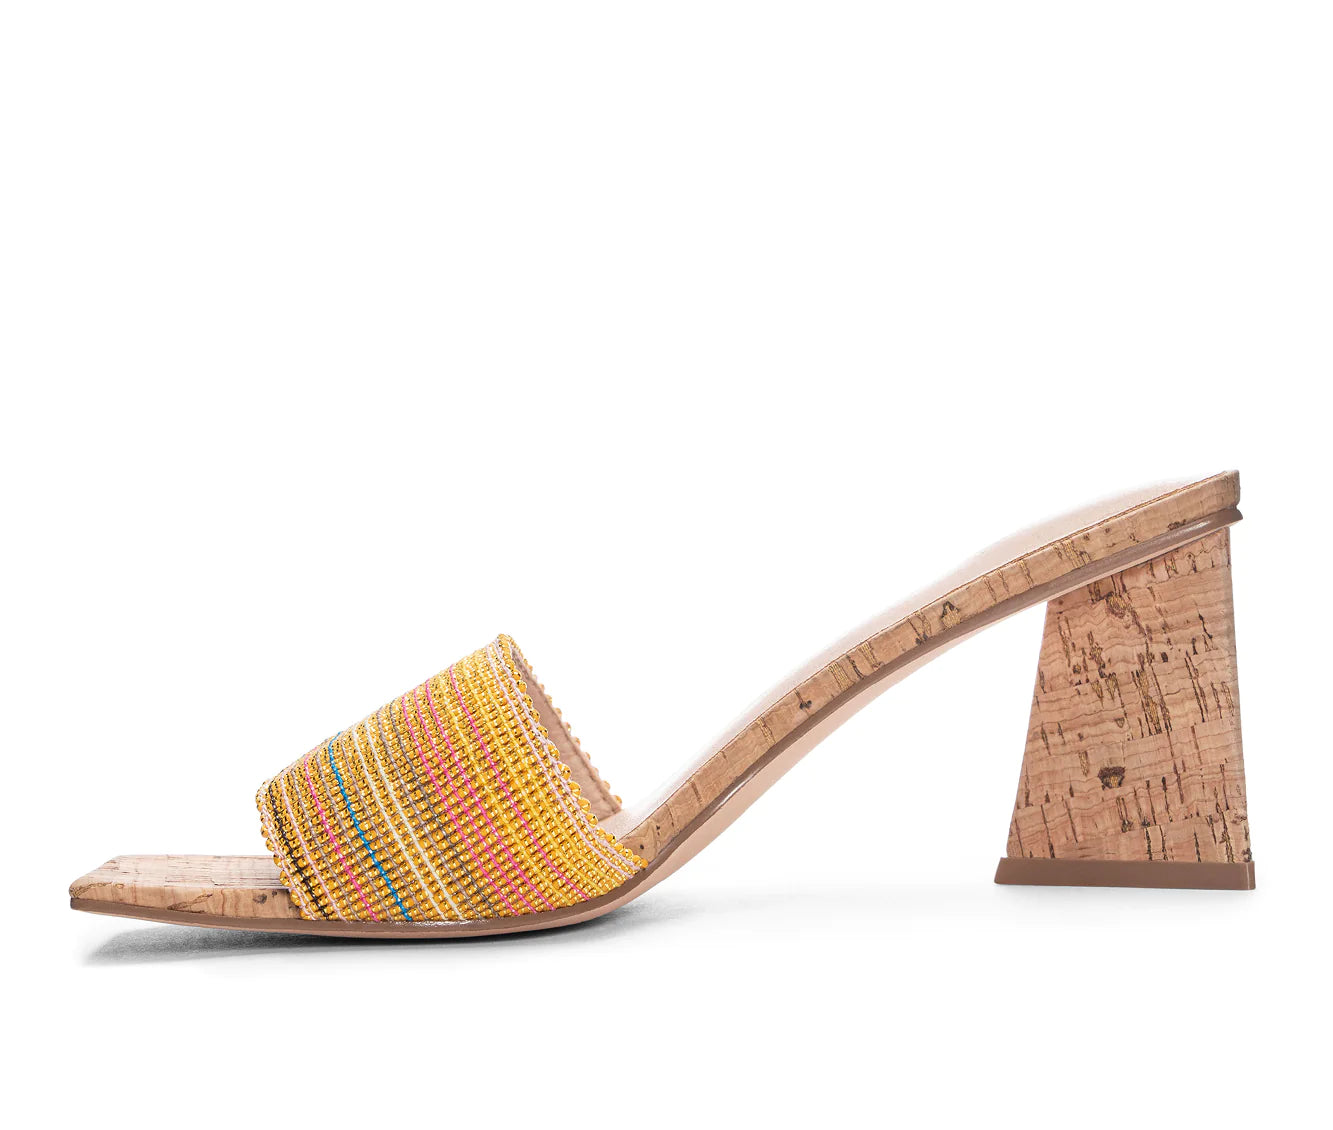 Photo of Yuna Woven Slide with cork triangular block heel detail and yellow and orange multi coloured elasticated band from Chinese Laundry available at UniKoncept in Waterloo